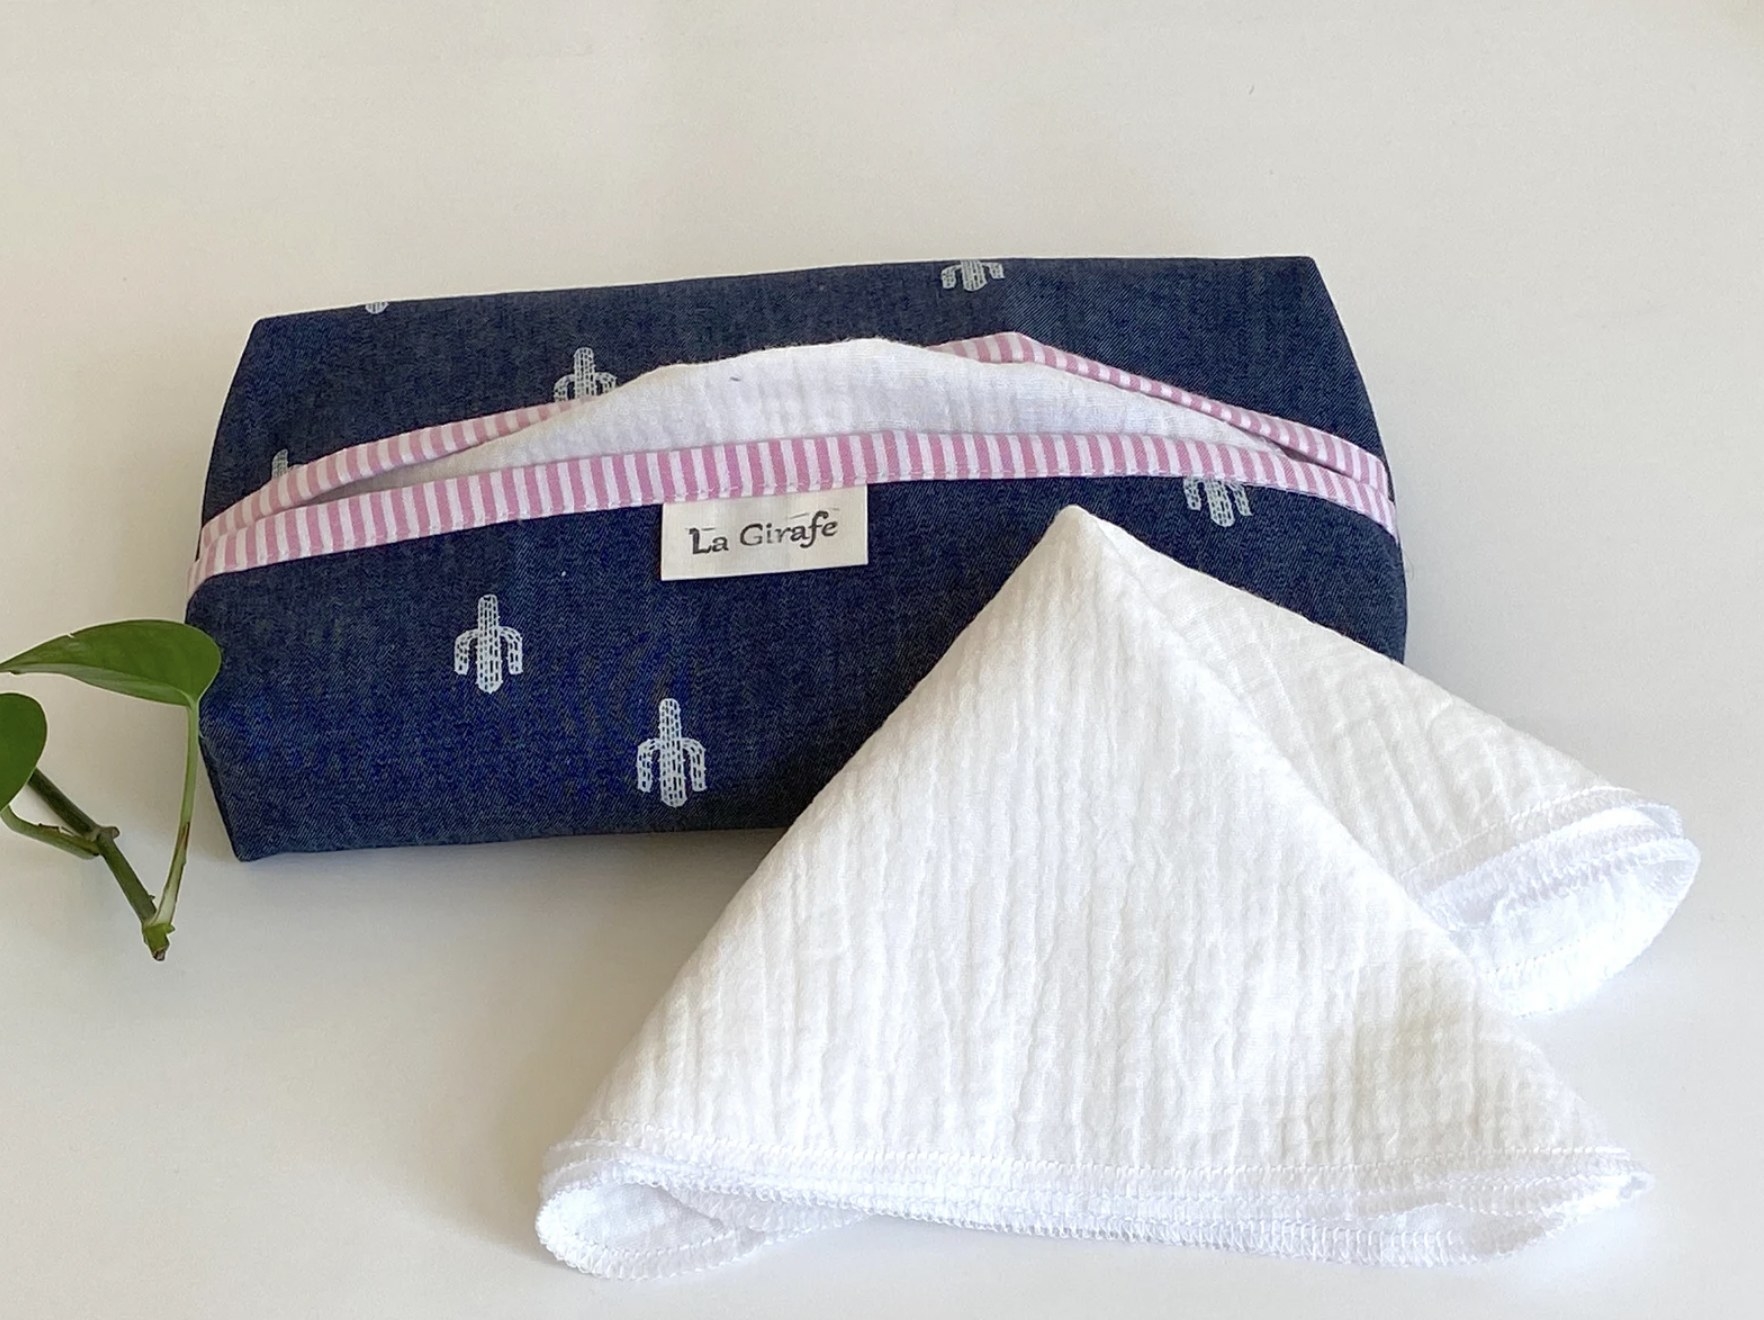 The denim tissue box with cactus print and pink striped trim with one cotton reusable tissue pulled out